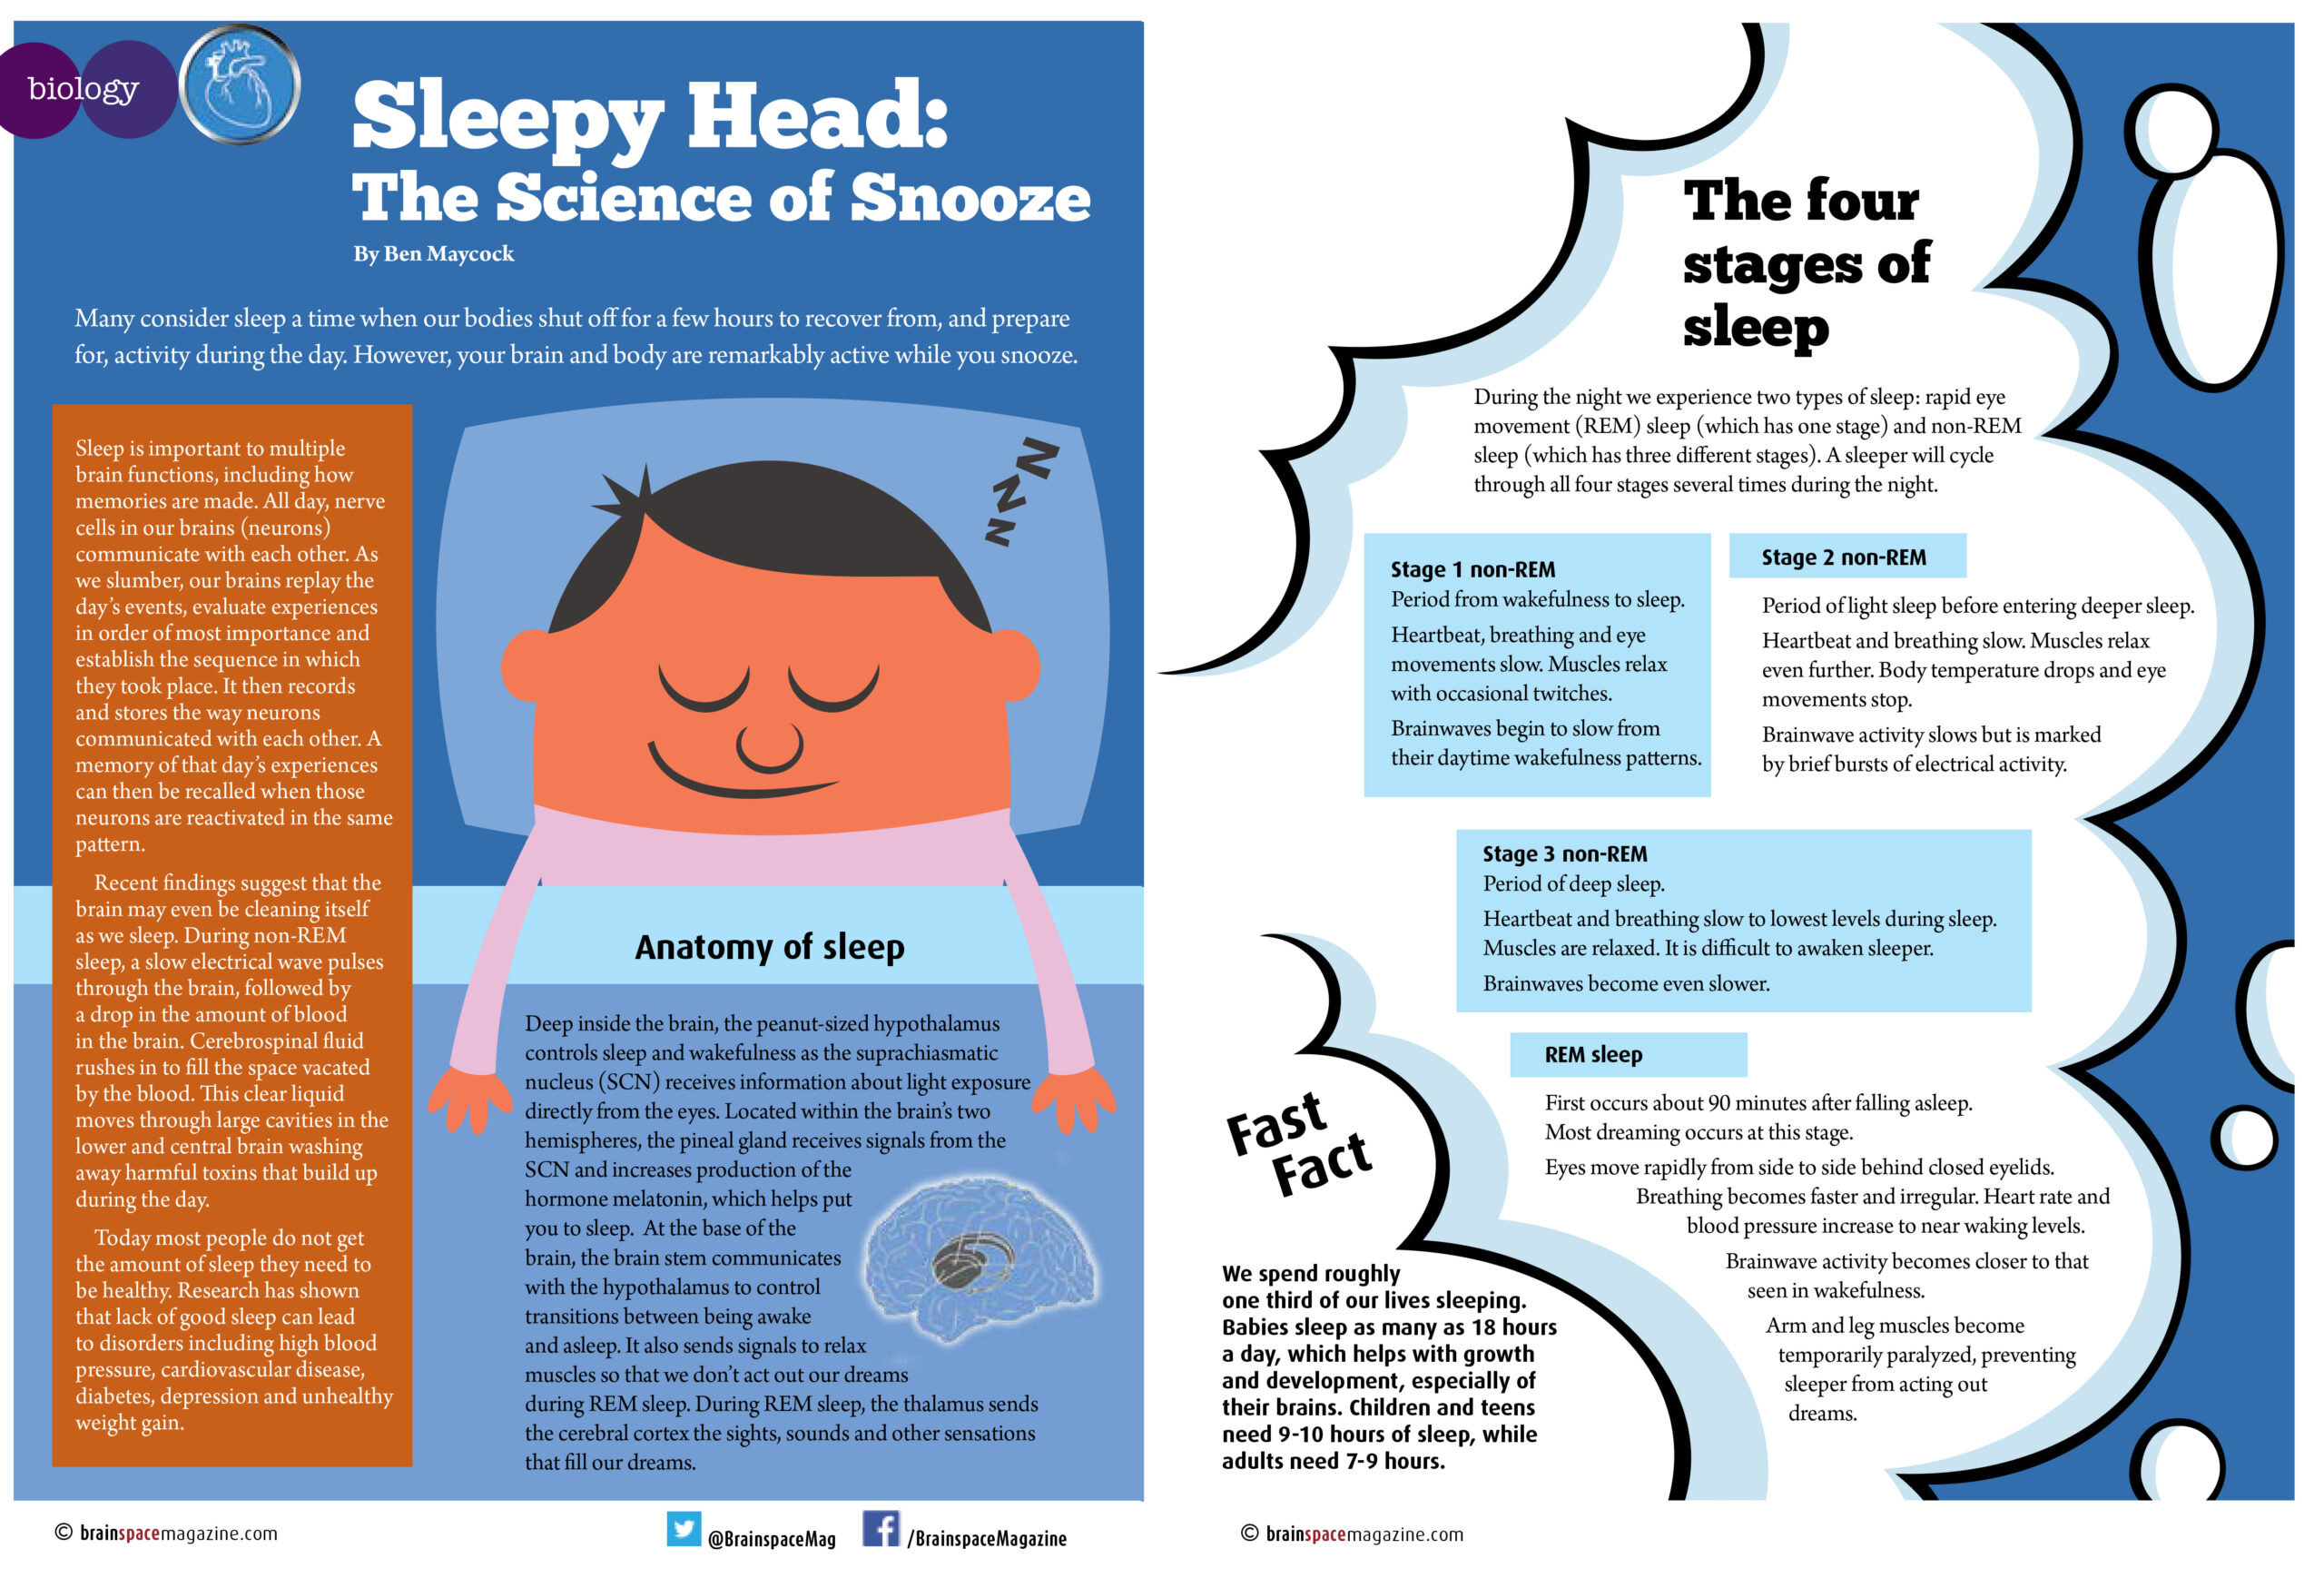 The Science of Snooze: Sleepy Head article